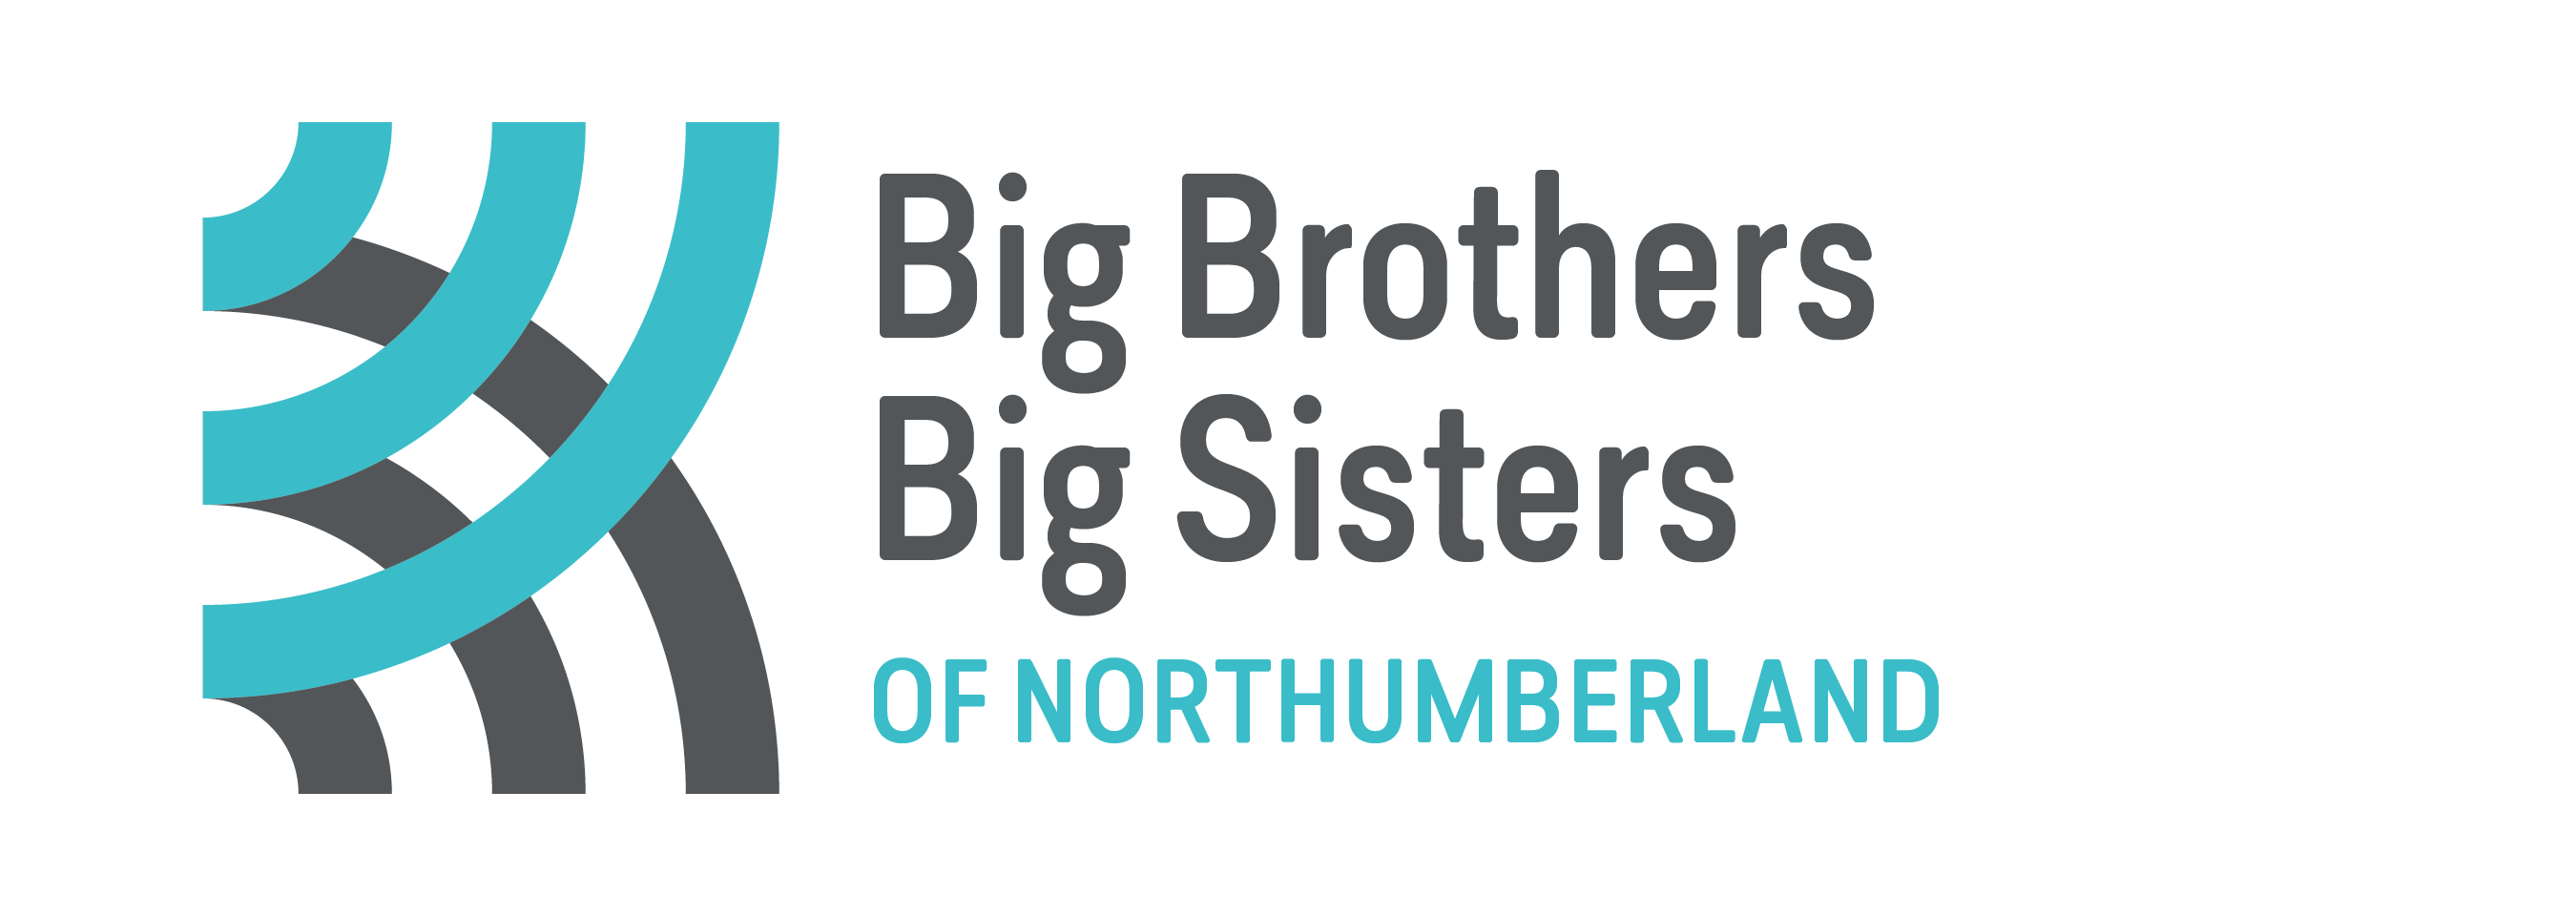 Big Brothers Big Sisters of South-West Durham and Northumberland logo